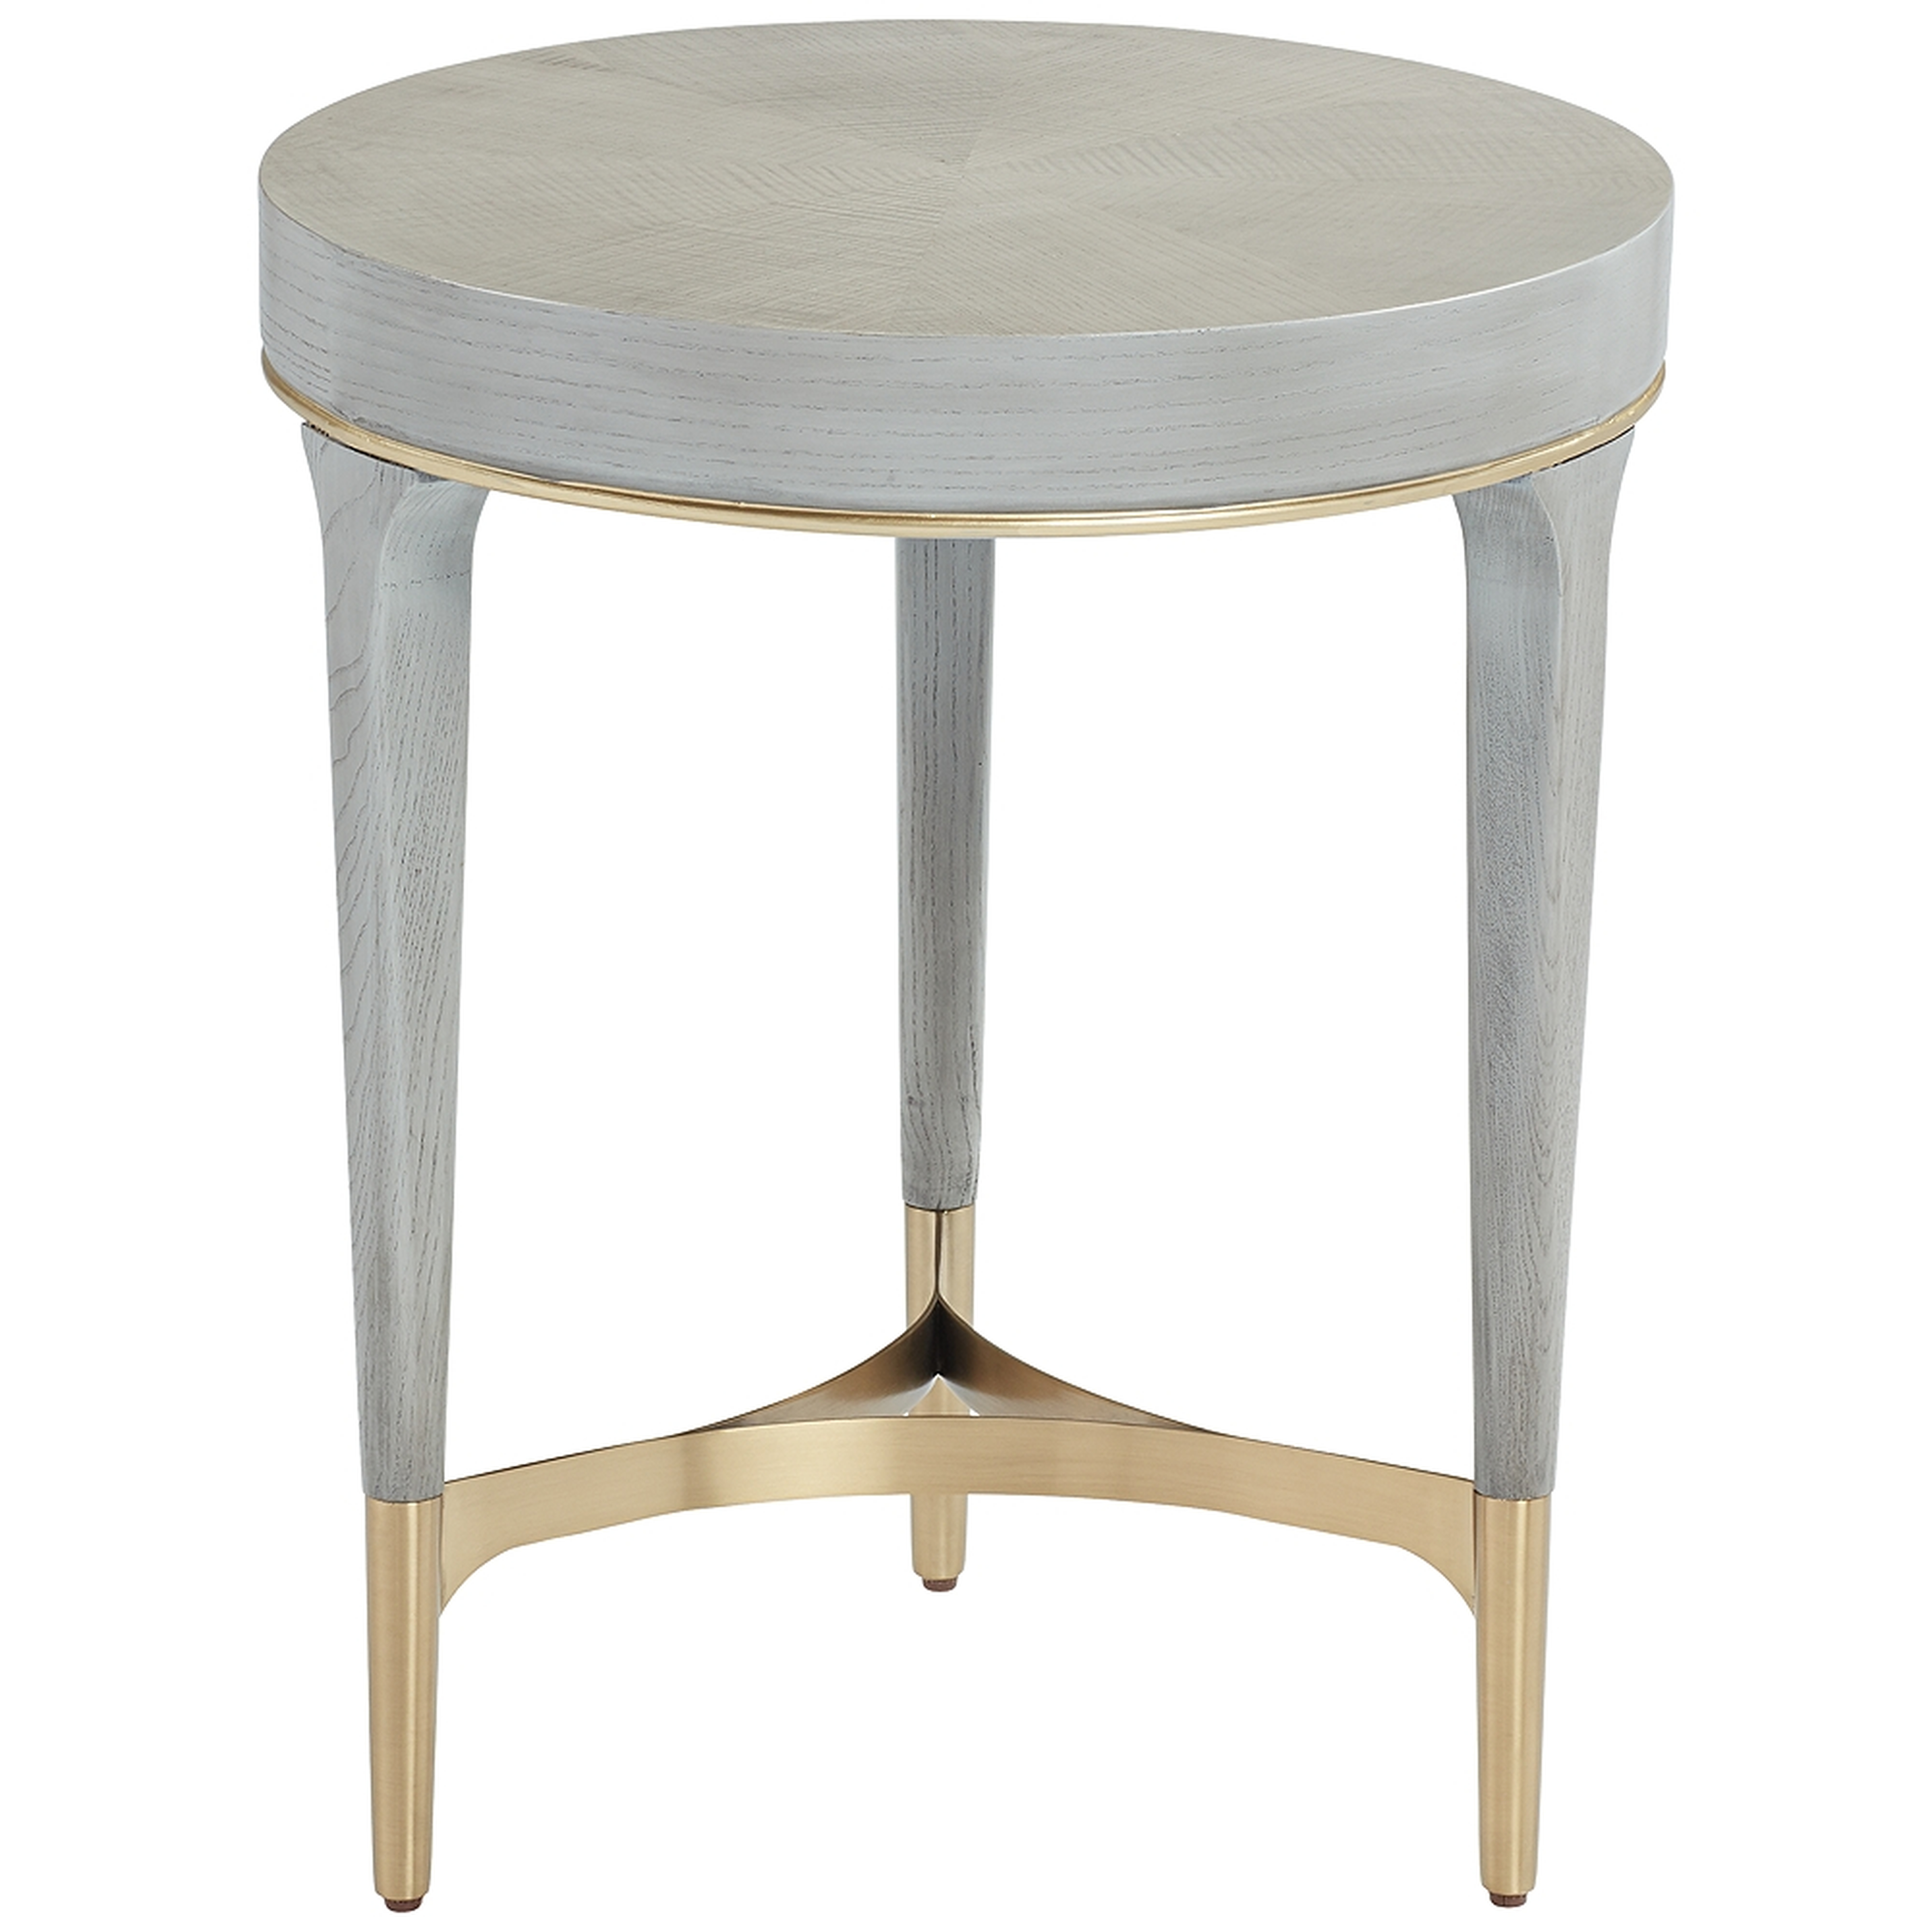 Danton Gray Round Side Table - Style # 79N10 - Lamps Plus